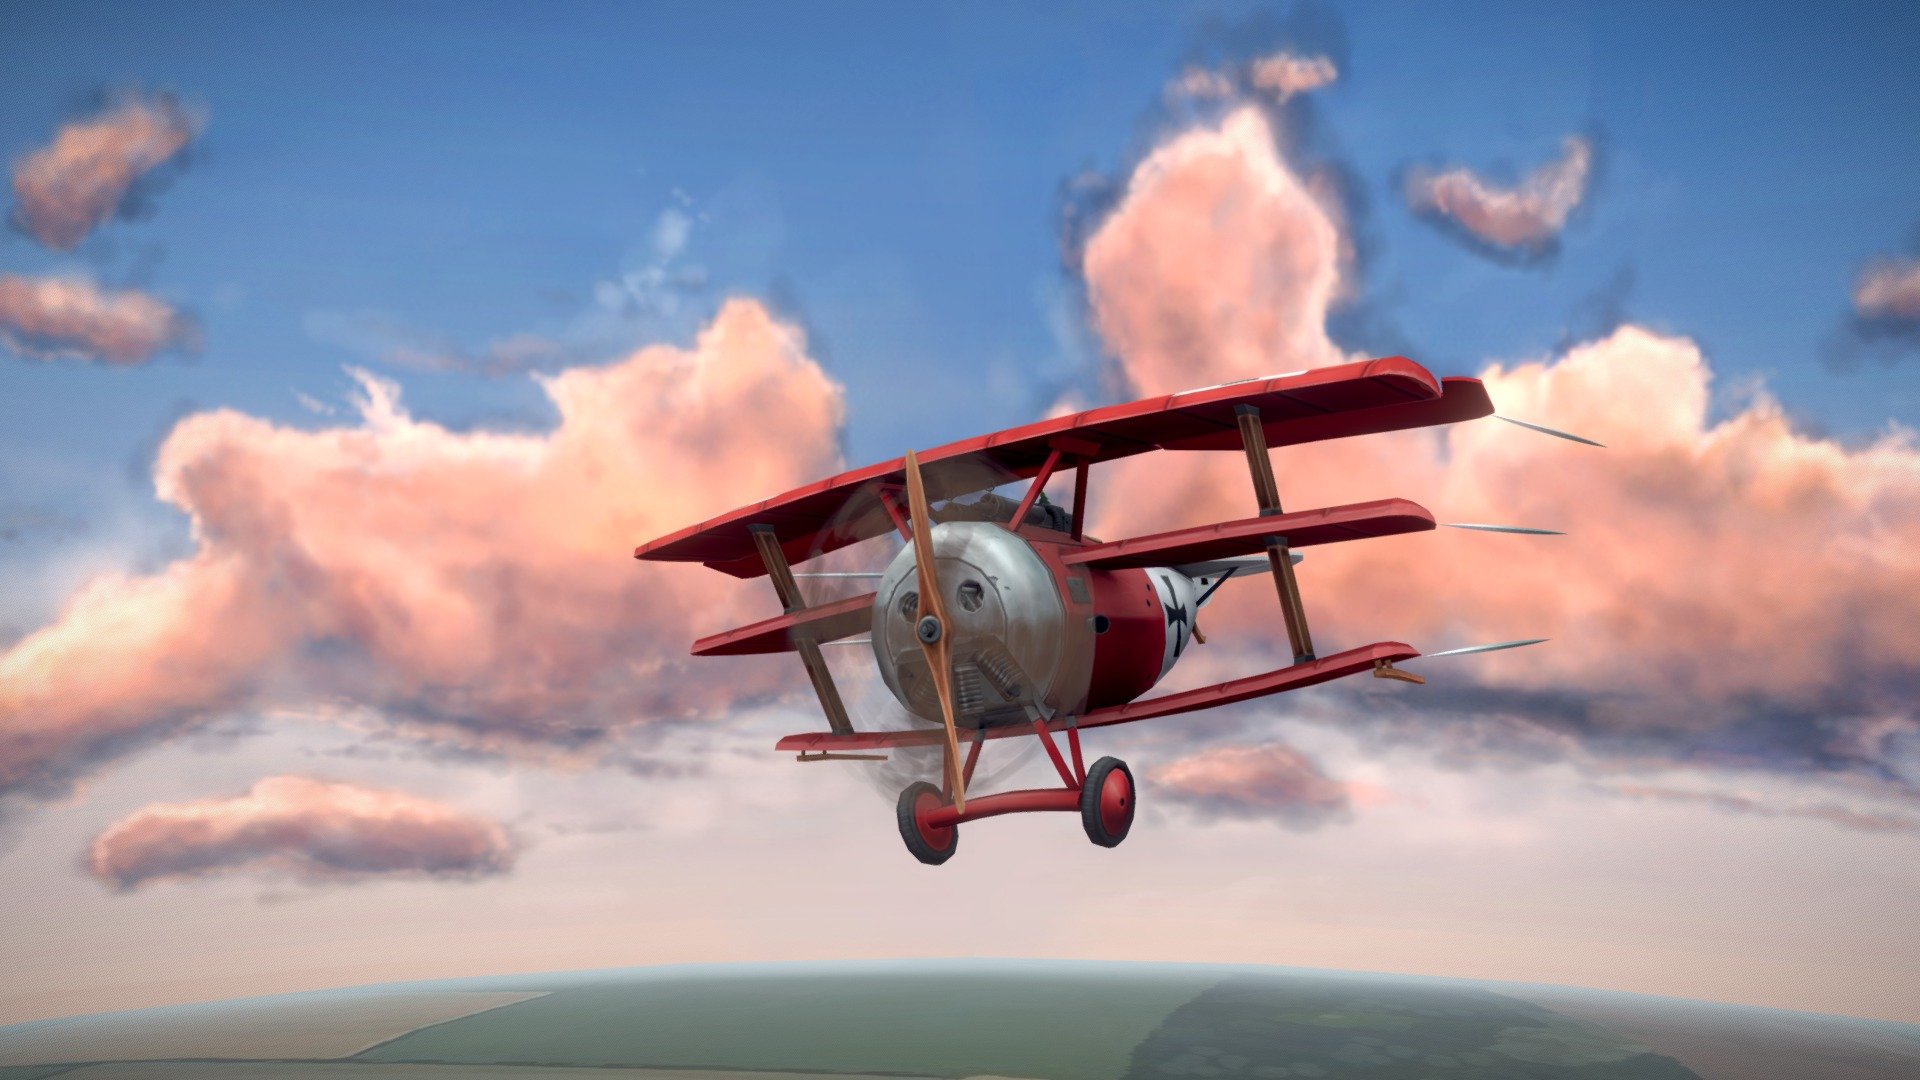 A short dogfight between Fokker Dr.1 and Sopwith Camel.
The stylized plane model was part of an assignment of the Game Art course at DAE. I had a lot of fun creating the plane so I decided to make a short animation aswell! 

Modelled and animated in 3ds max, all textures were made in photoshop.

Enjoy! - Deadly Duo - A Sketchfab Short - 3D model by Lars Korden (@Lark.Art) 3d model